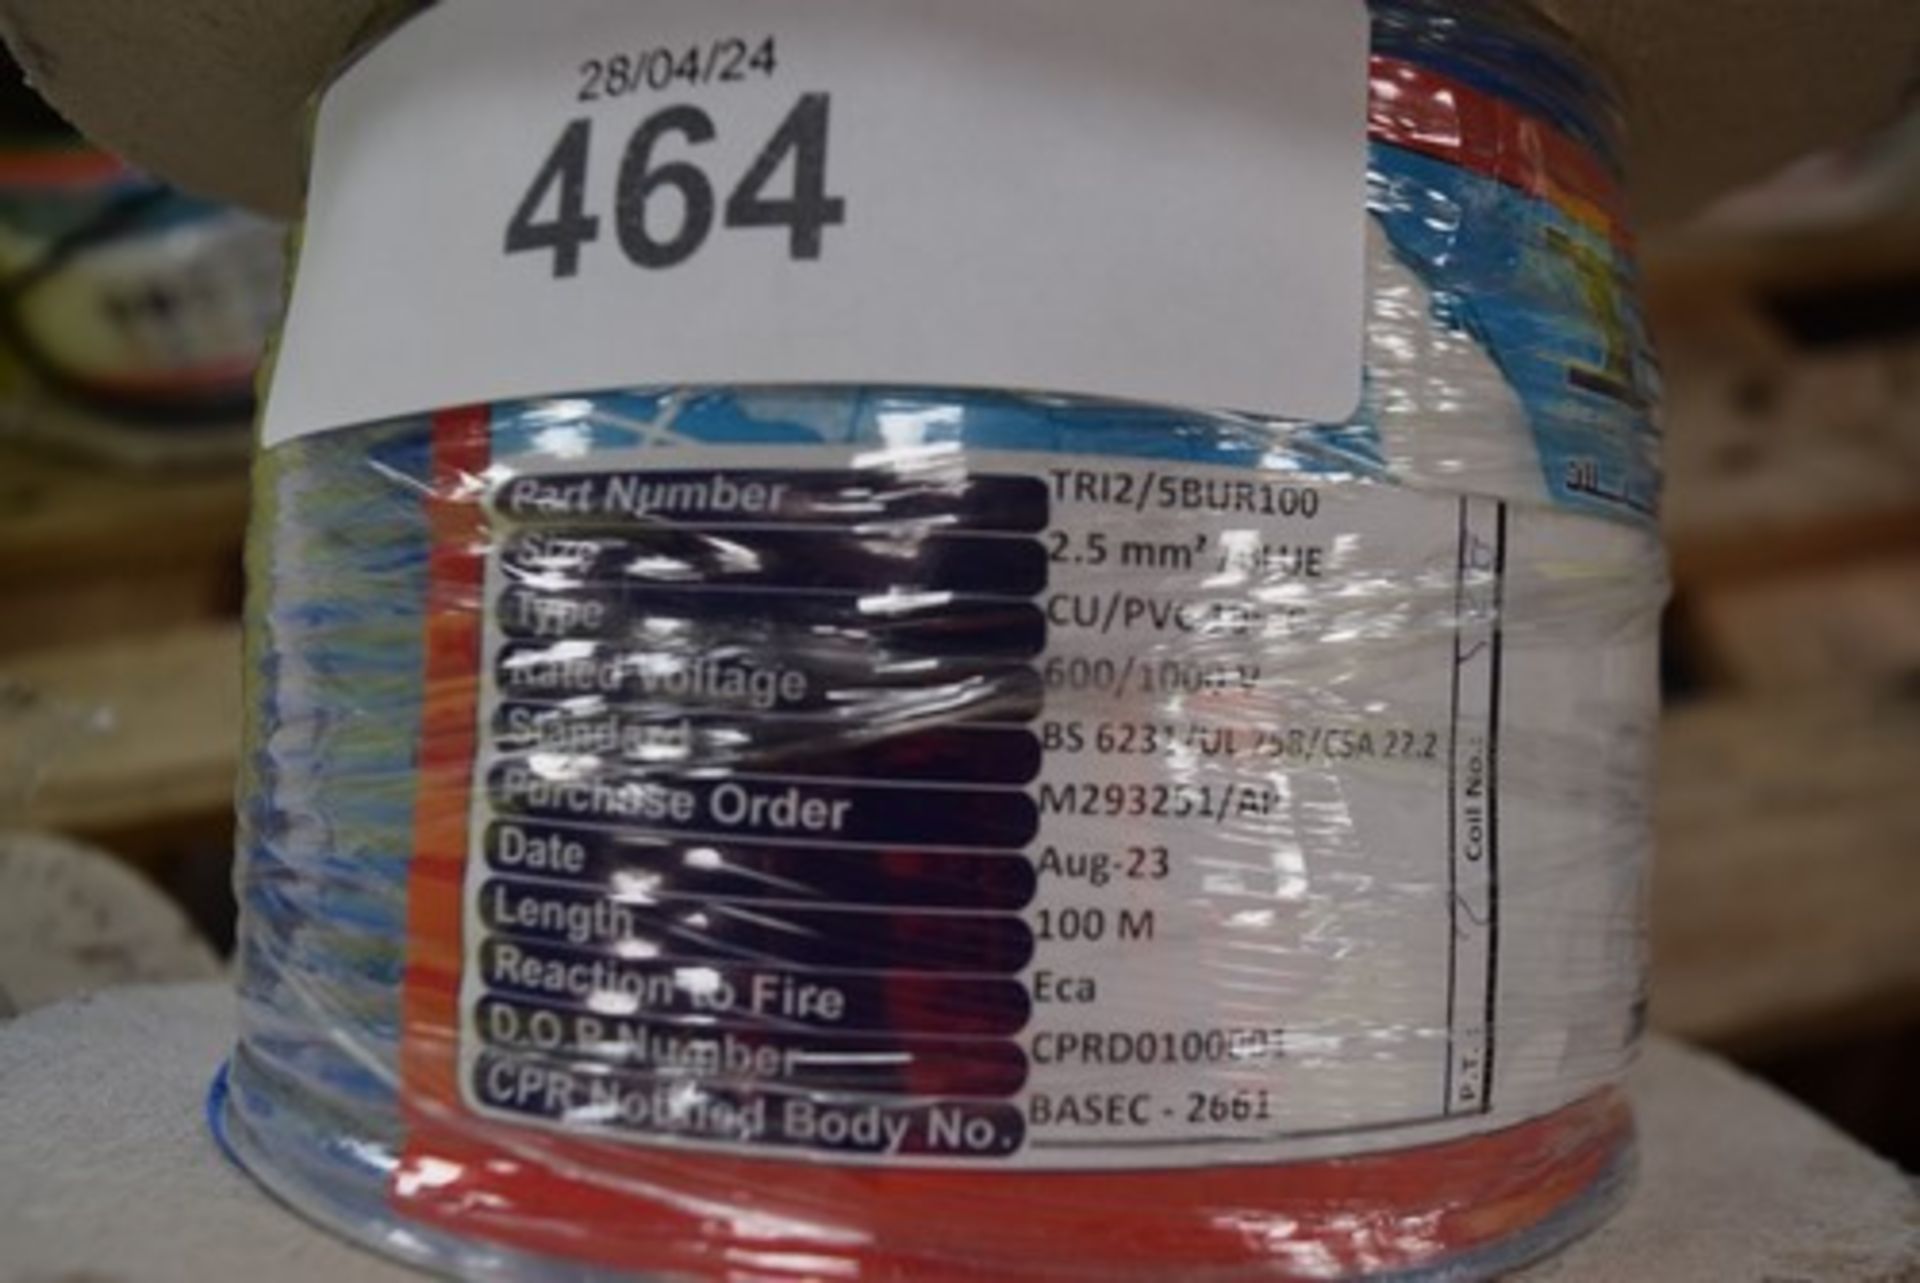 A selection of Incom small gauge wires, including 1mm, 1.5mm and 2.5mm thick, etc. - new (TS)(A) - Image 2 of 4